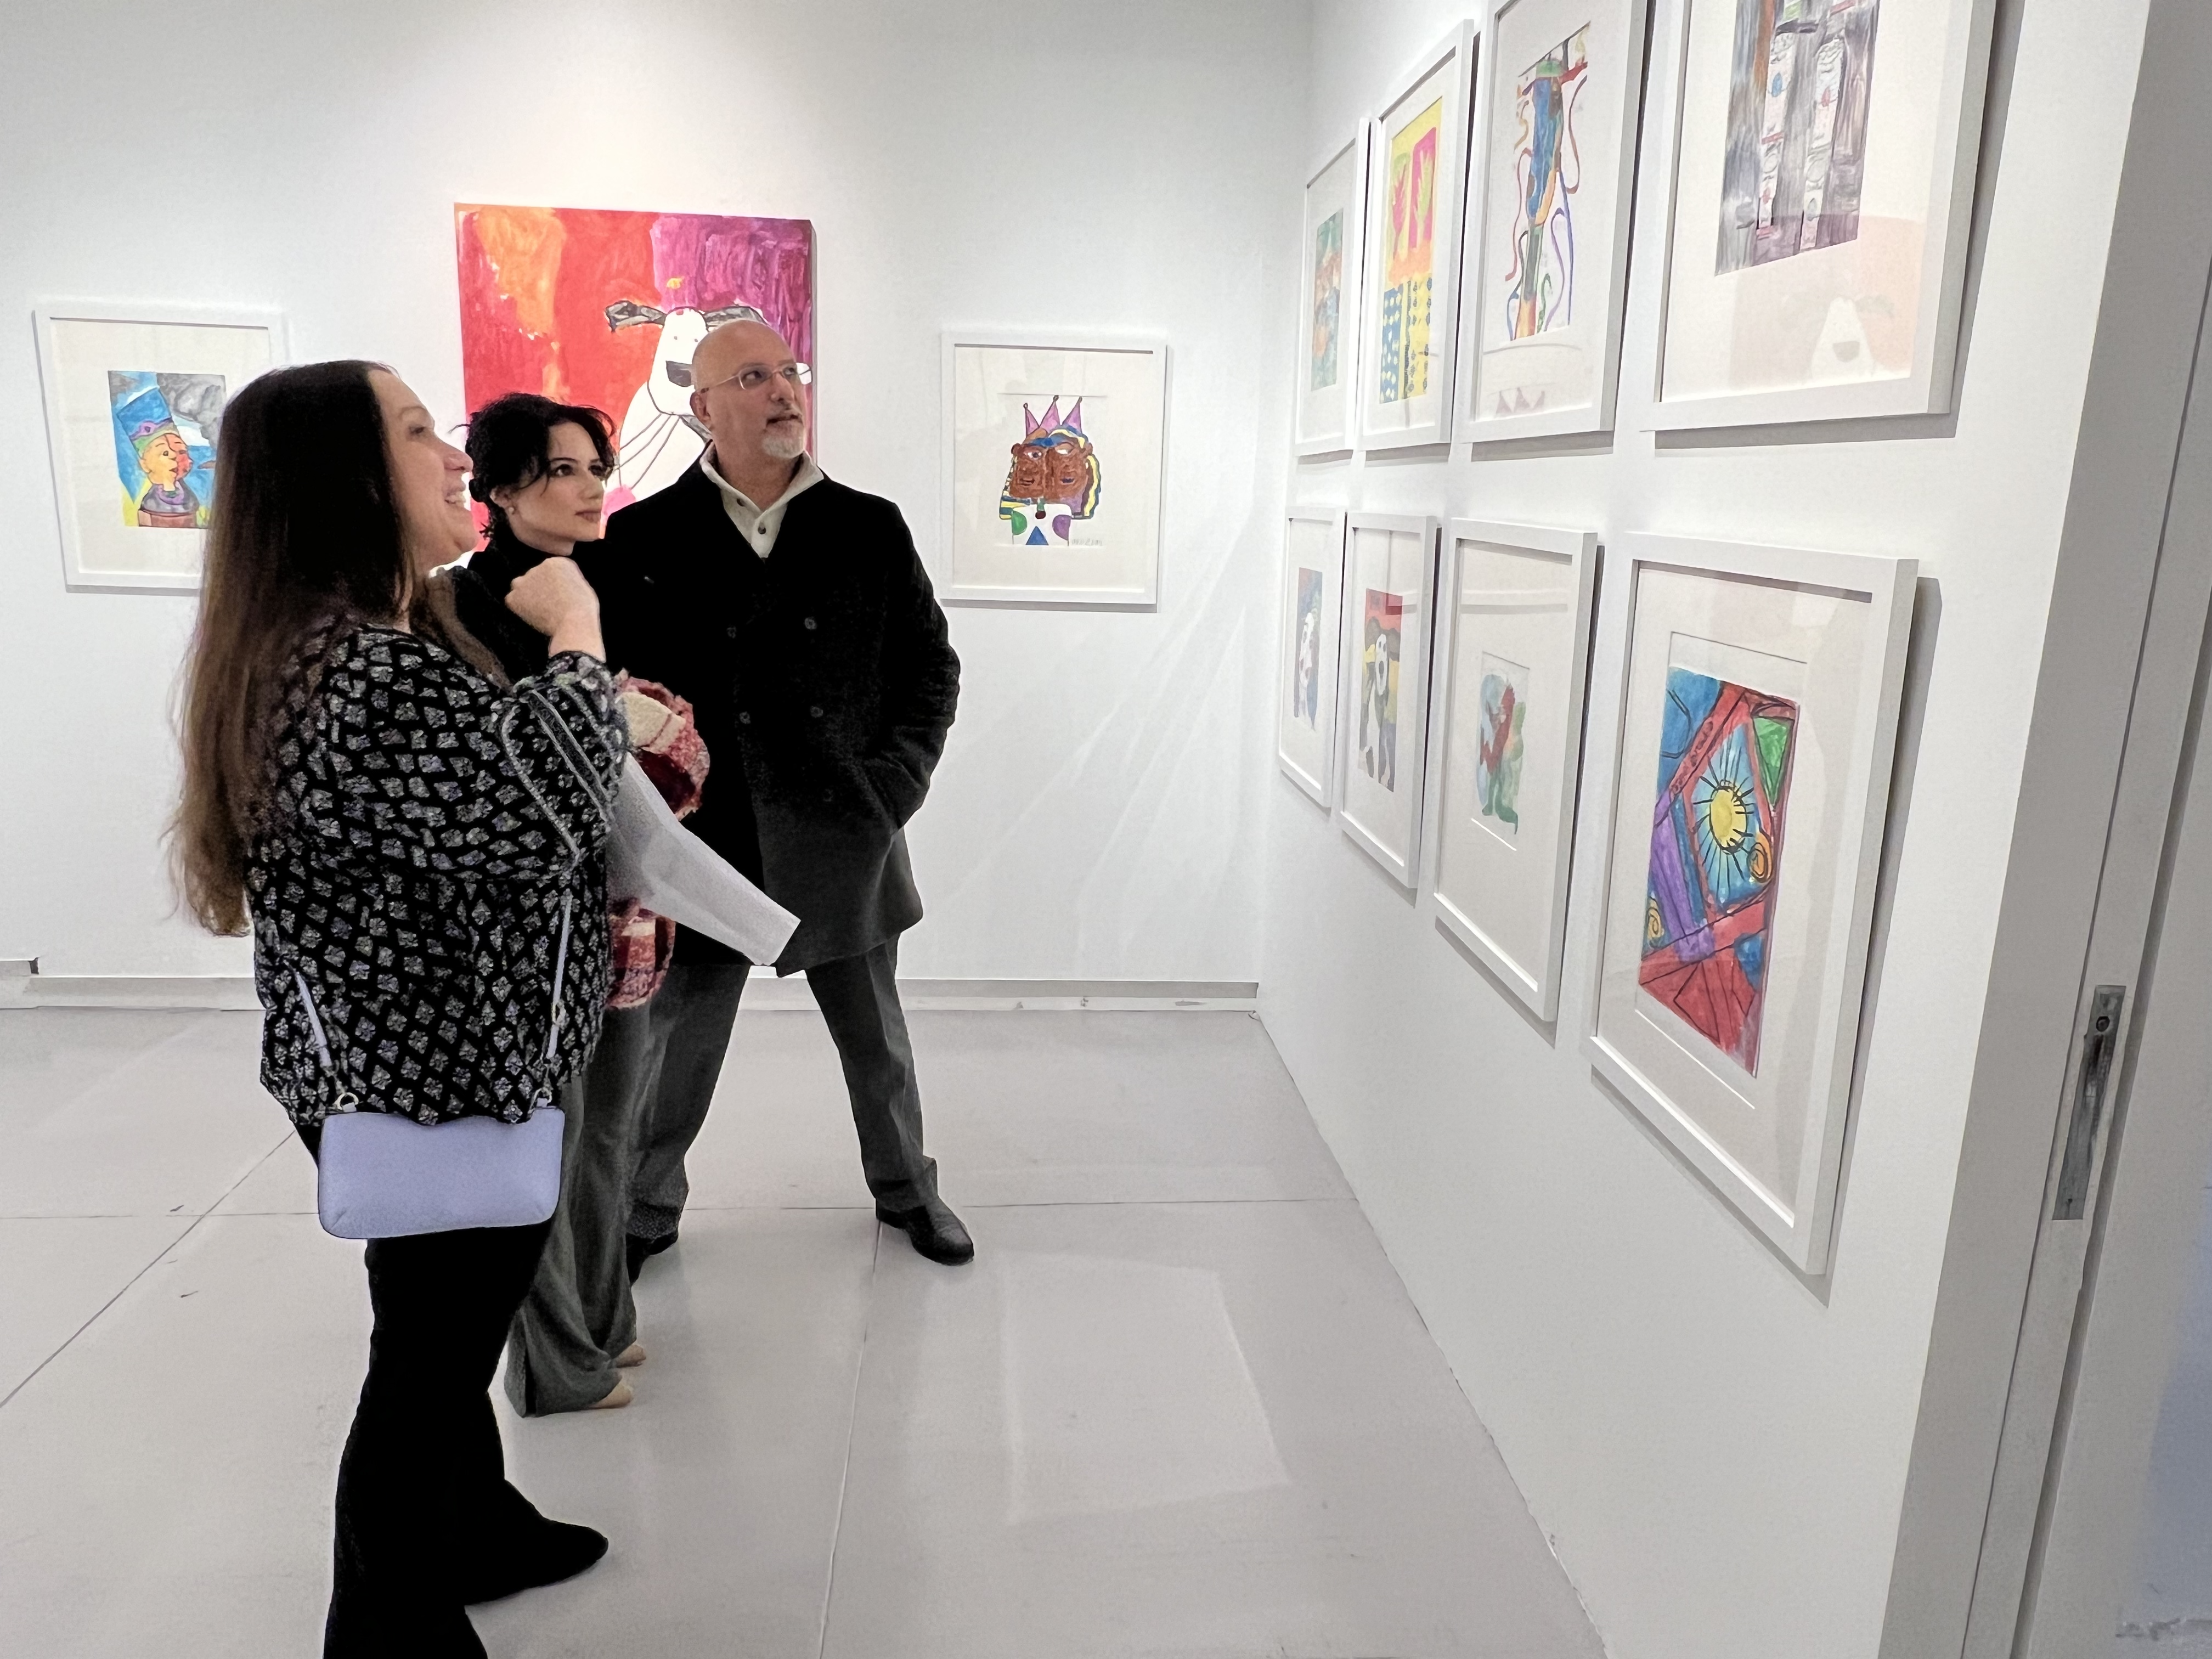 Visitors admiring the ArtAbility Exhibition at the Agora Gallery